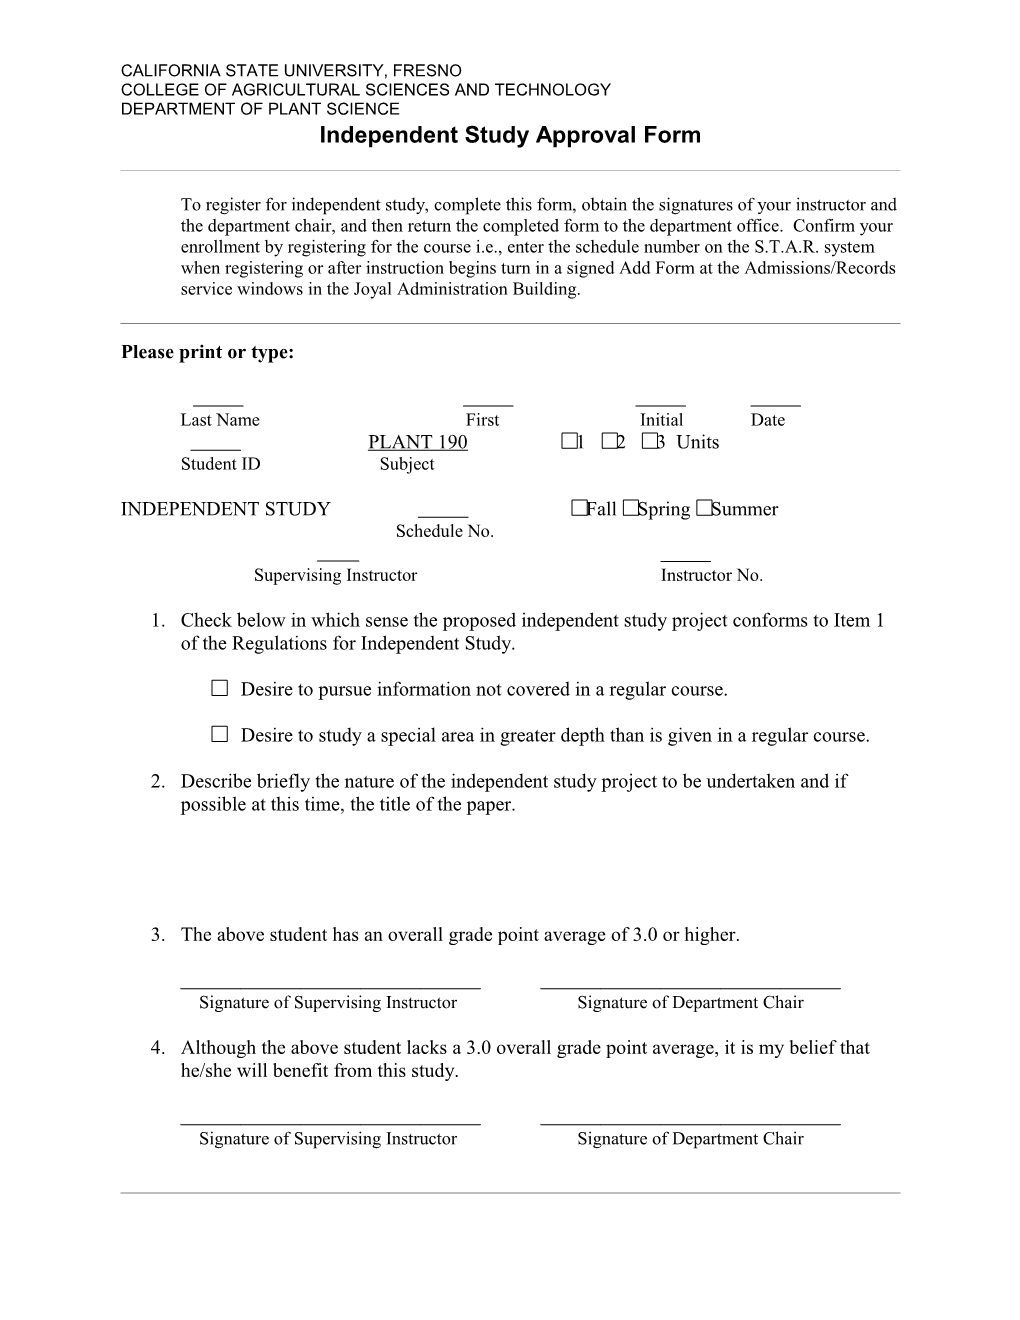 Independent Study Approval Form